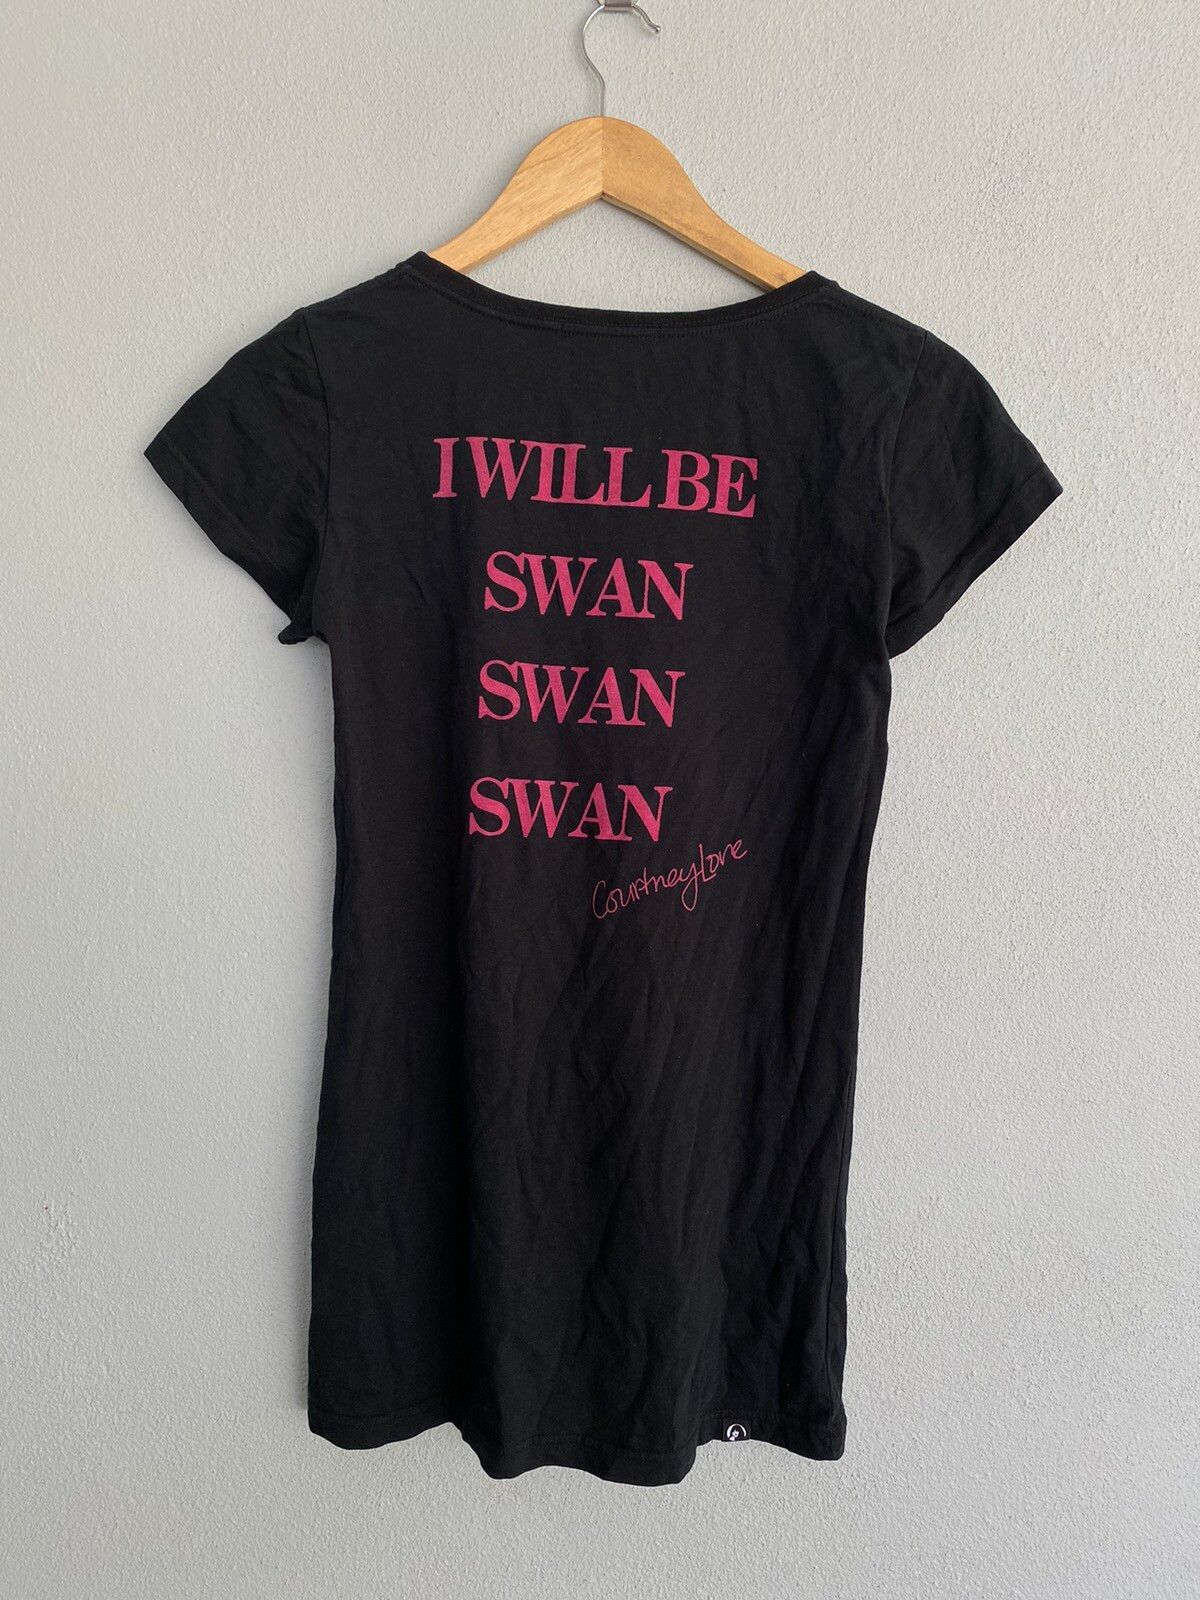 Hysteric Glamour x Courtney Love I Will Be Swan Swan tees - 4